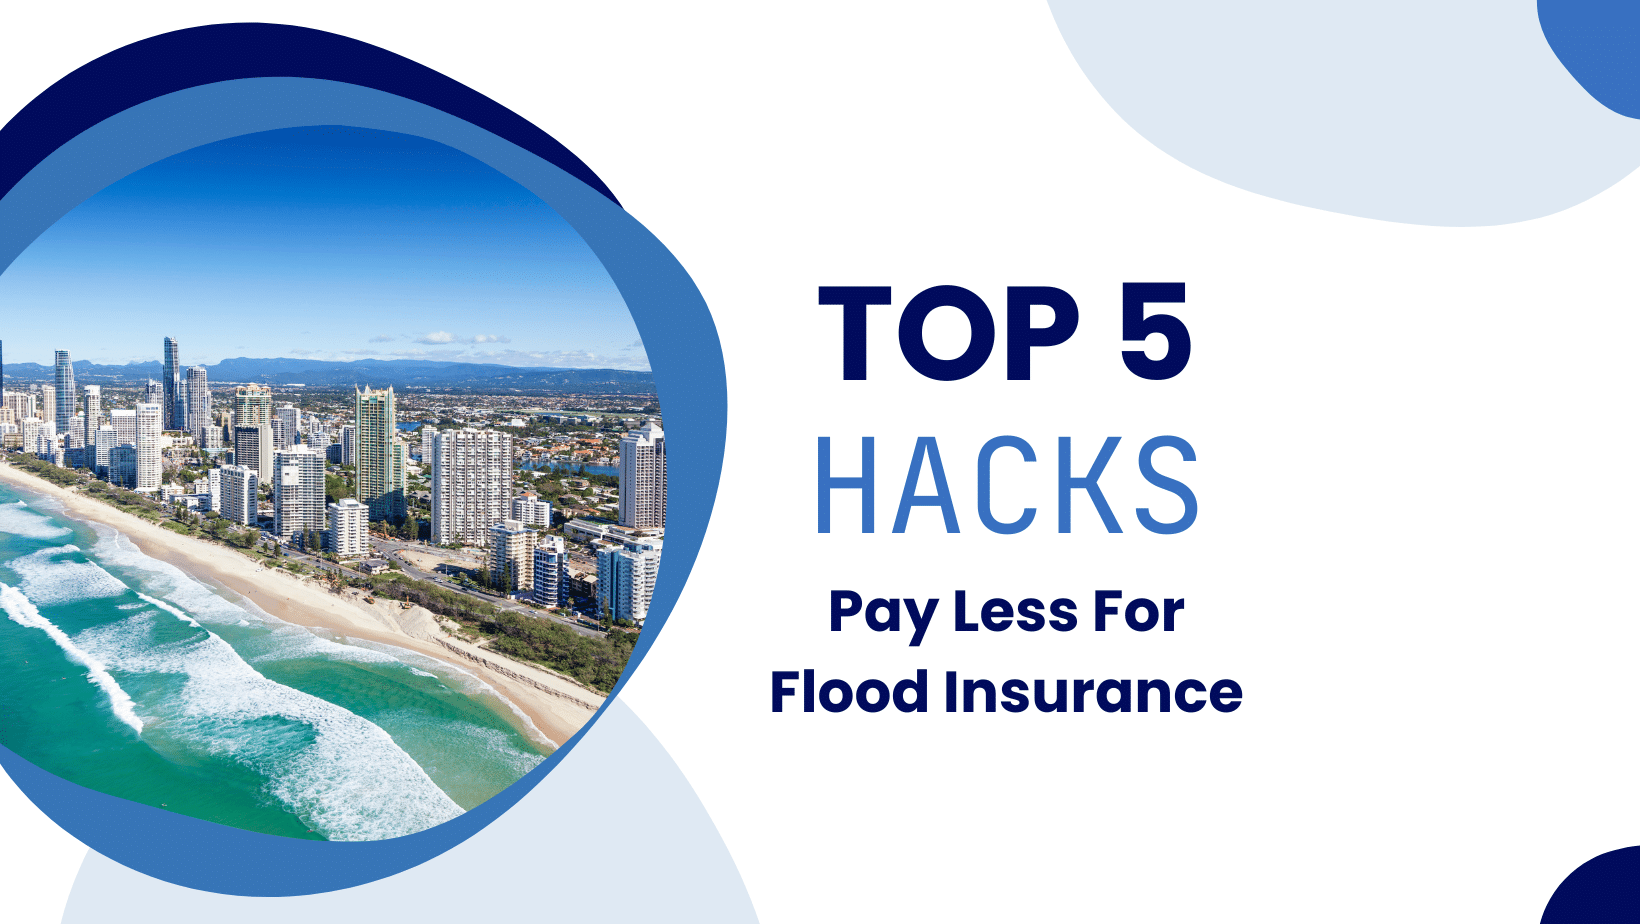 Aerial view of a coastal city with overlay text "Top 5 Hacks - Pay Less For Flood Insurance."